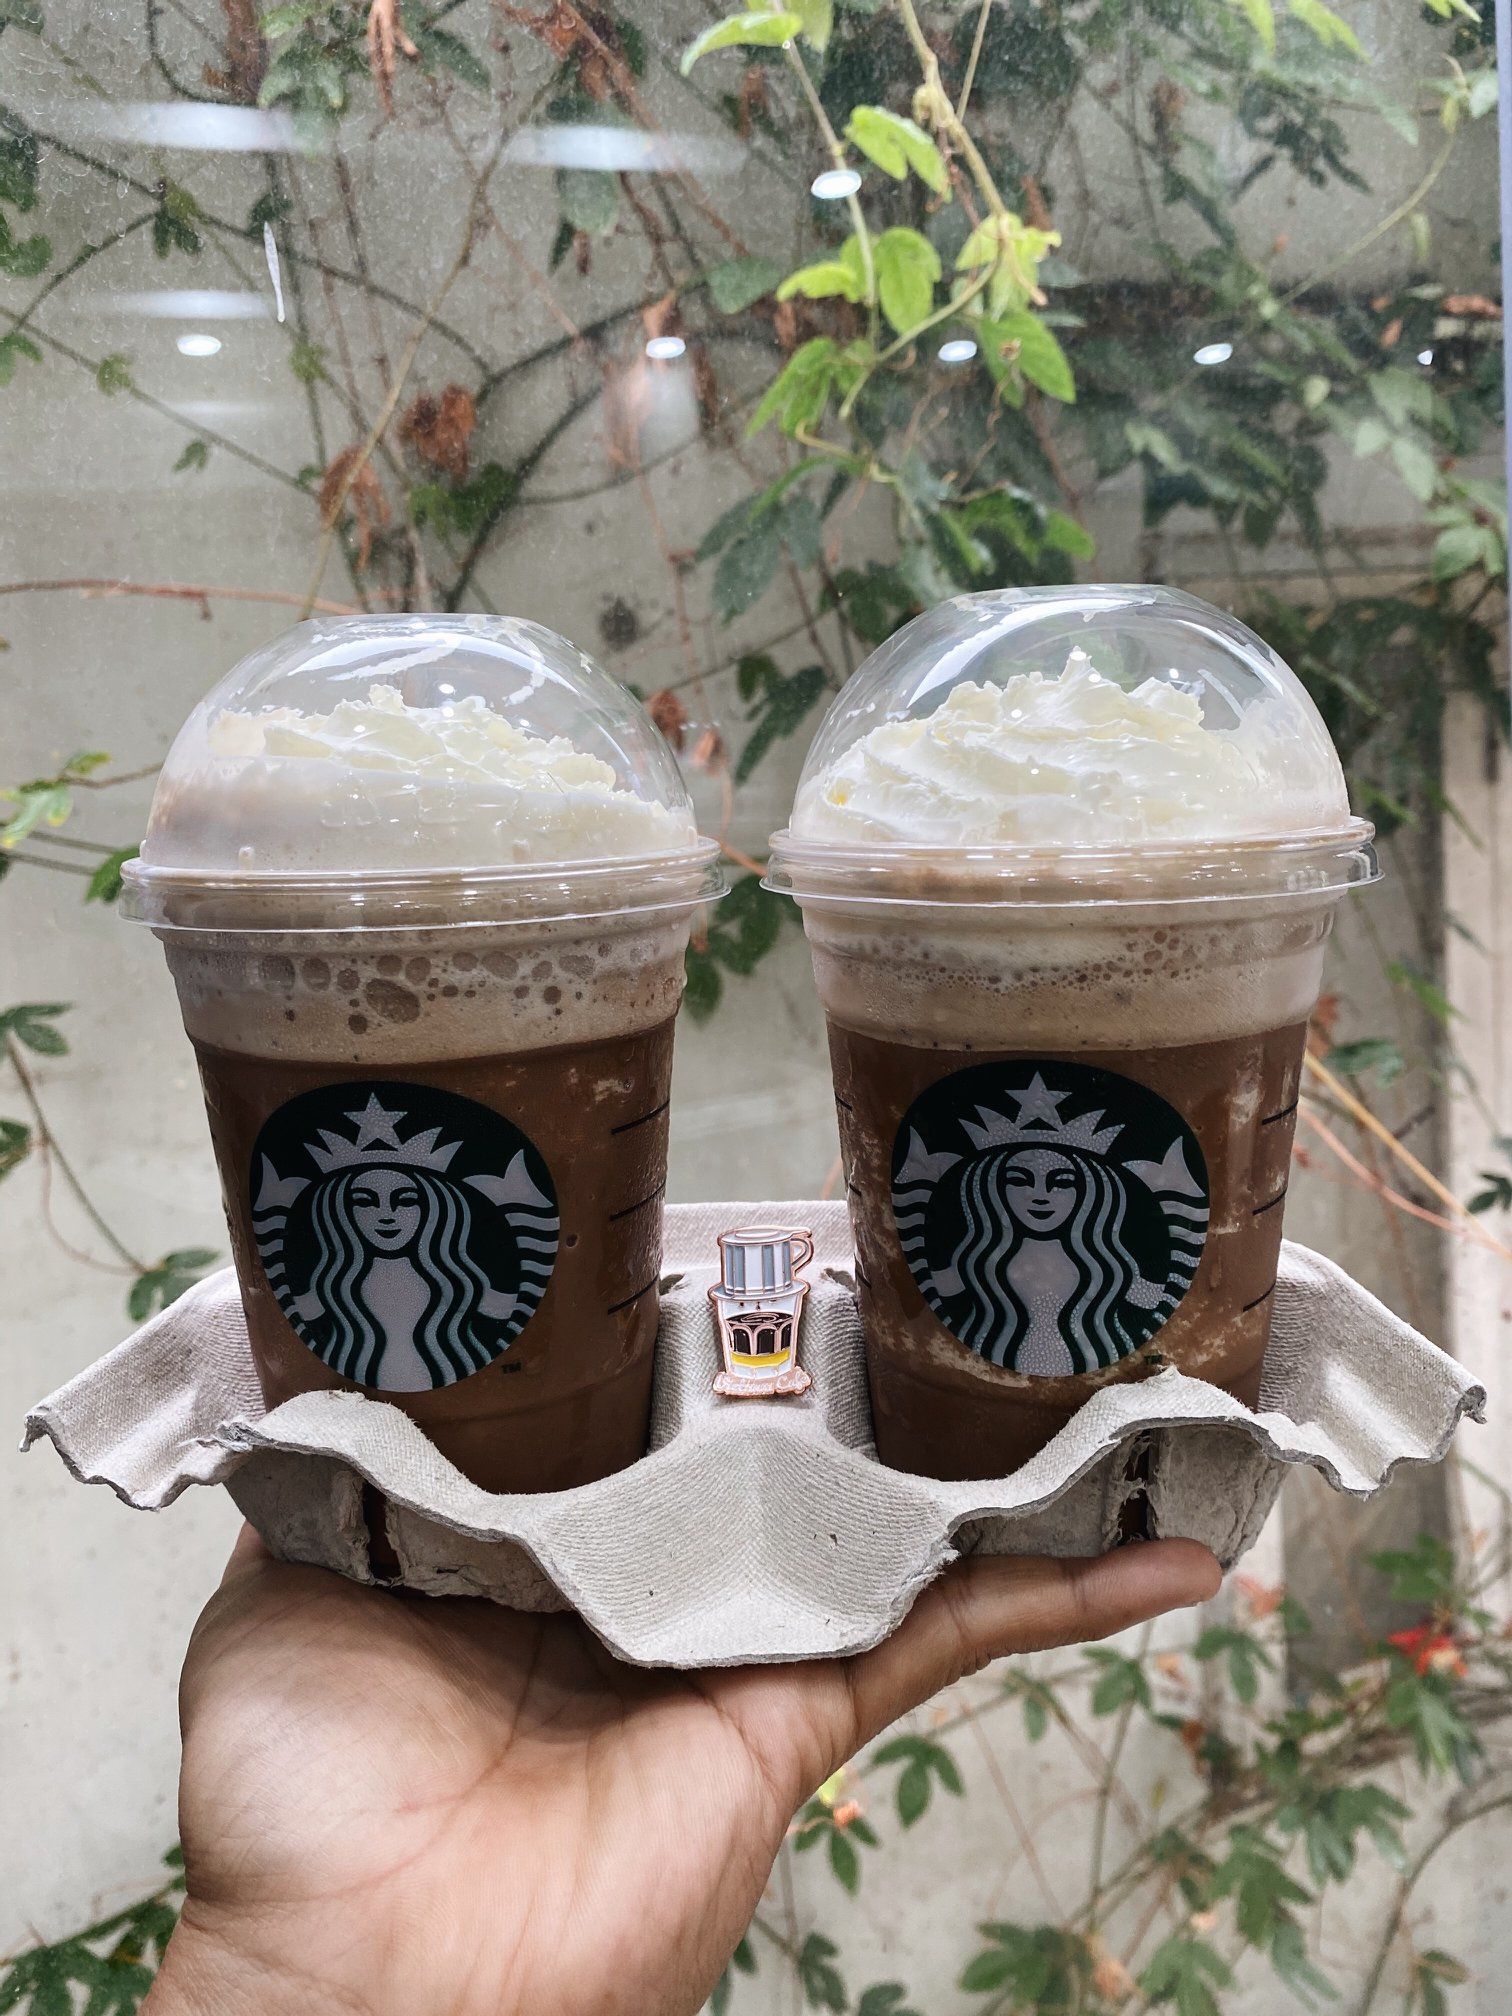 tap xe ghe lien - duy nhat hom nay starbucks tung khuyen mai 2 ly chi 110k  - anh 2